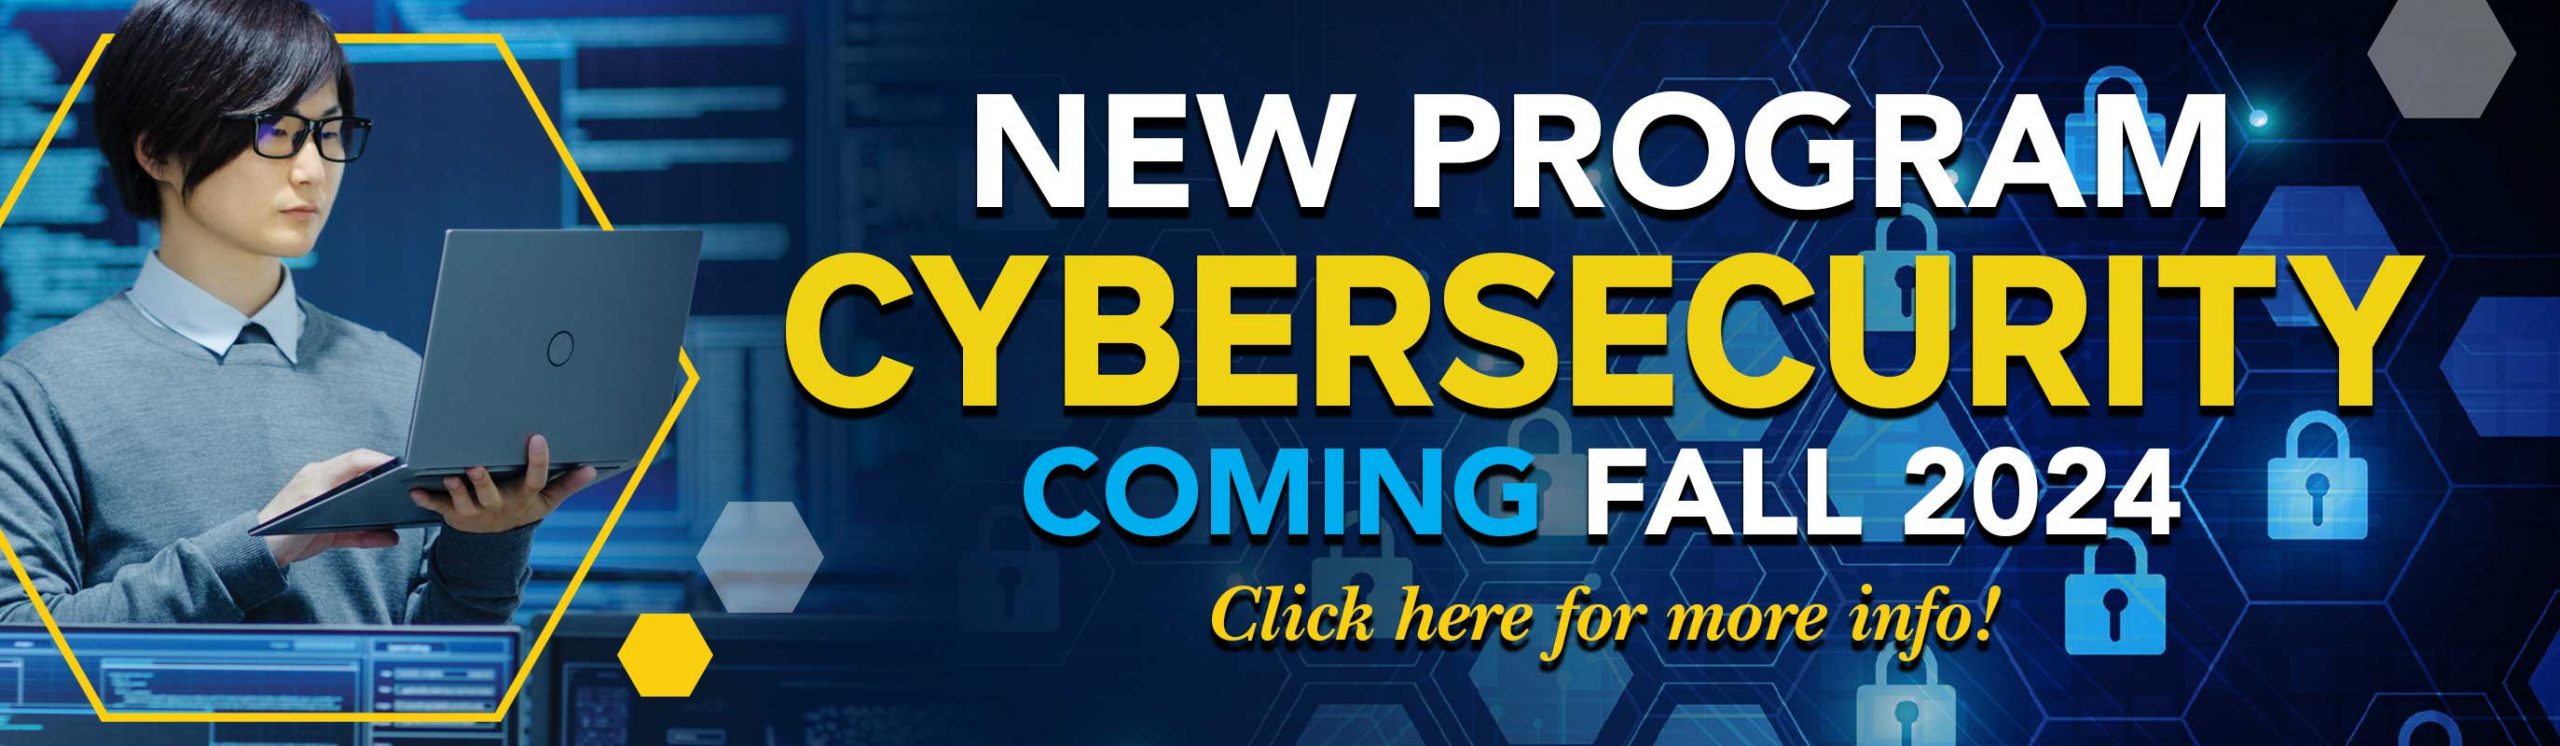 RCTC Launches New Cybersecurity Program